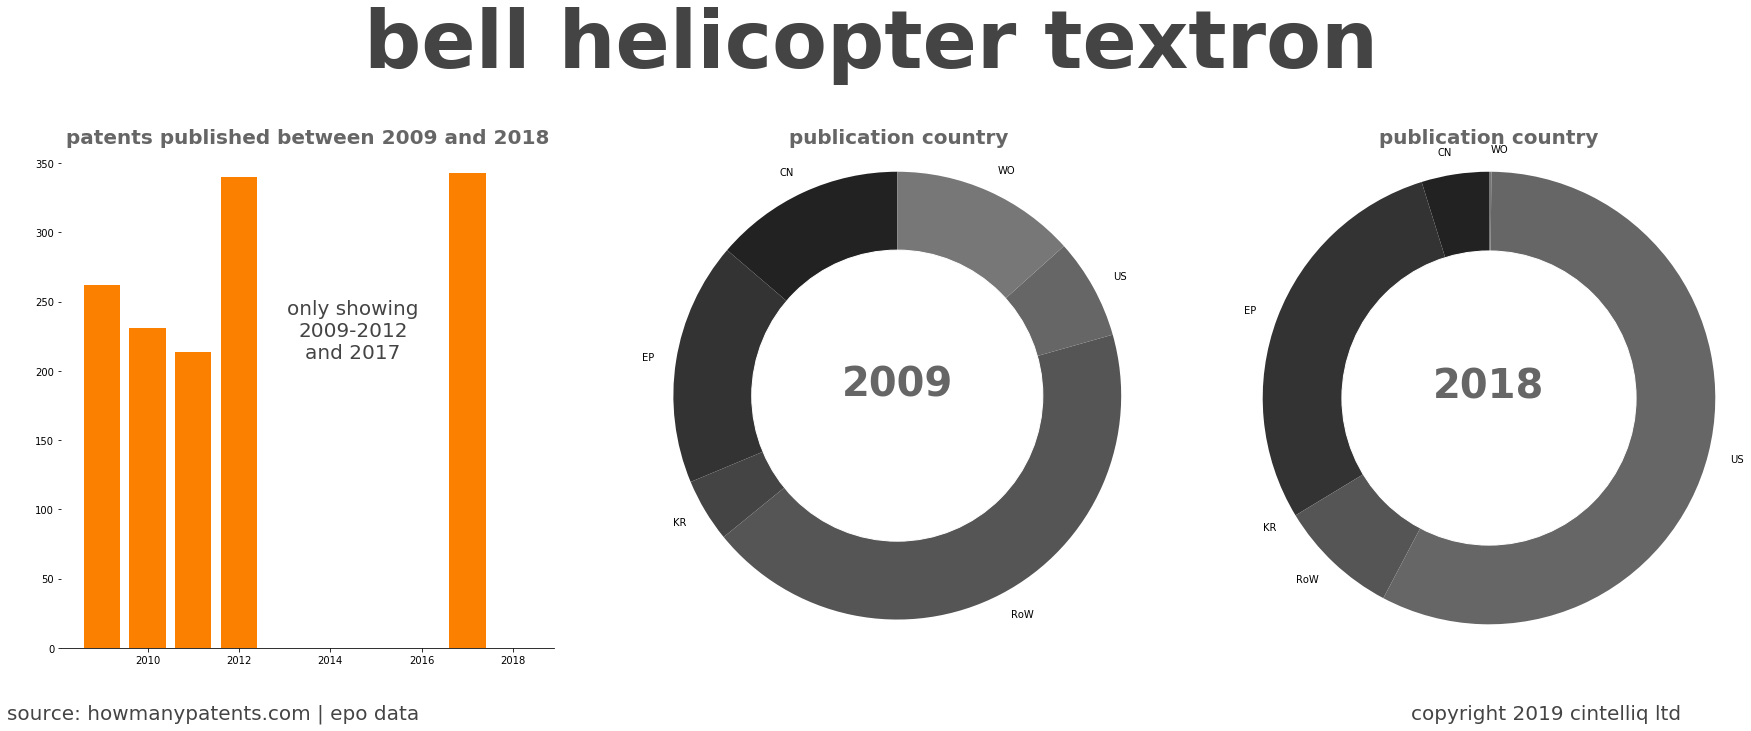 summary of patents for Bell Helicopter Textron